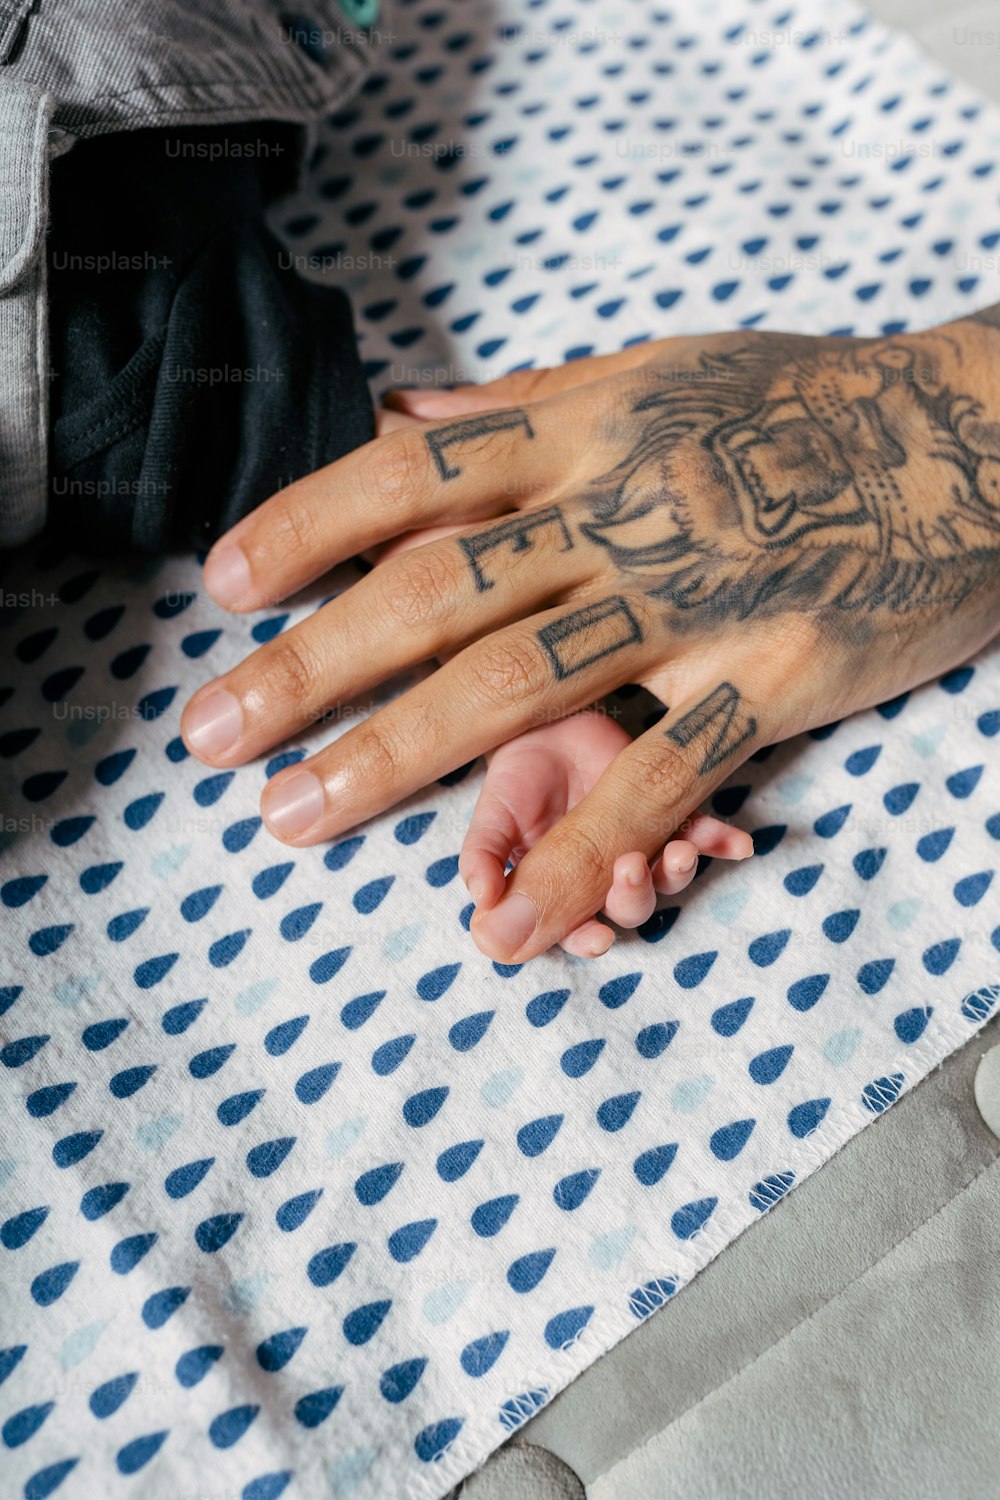 a person with a tattoo on their hand